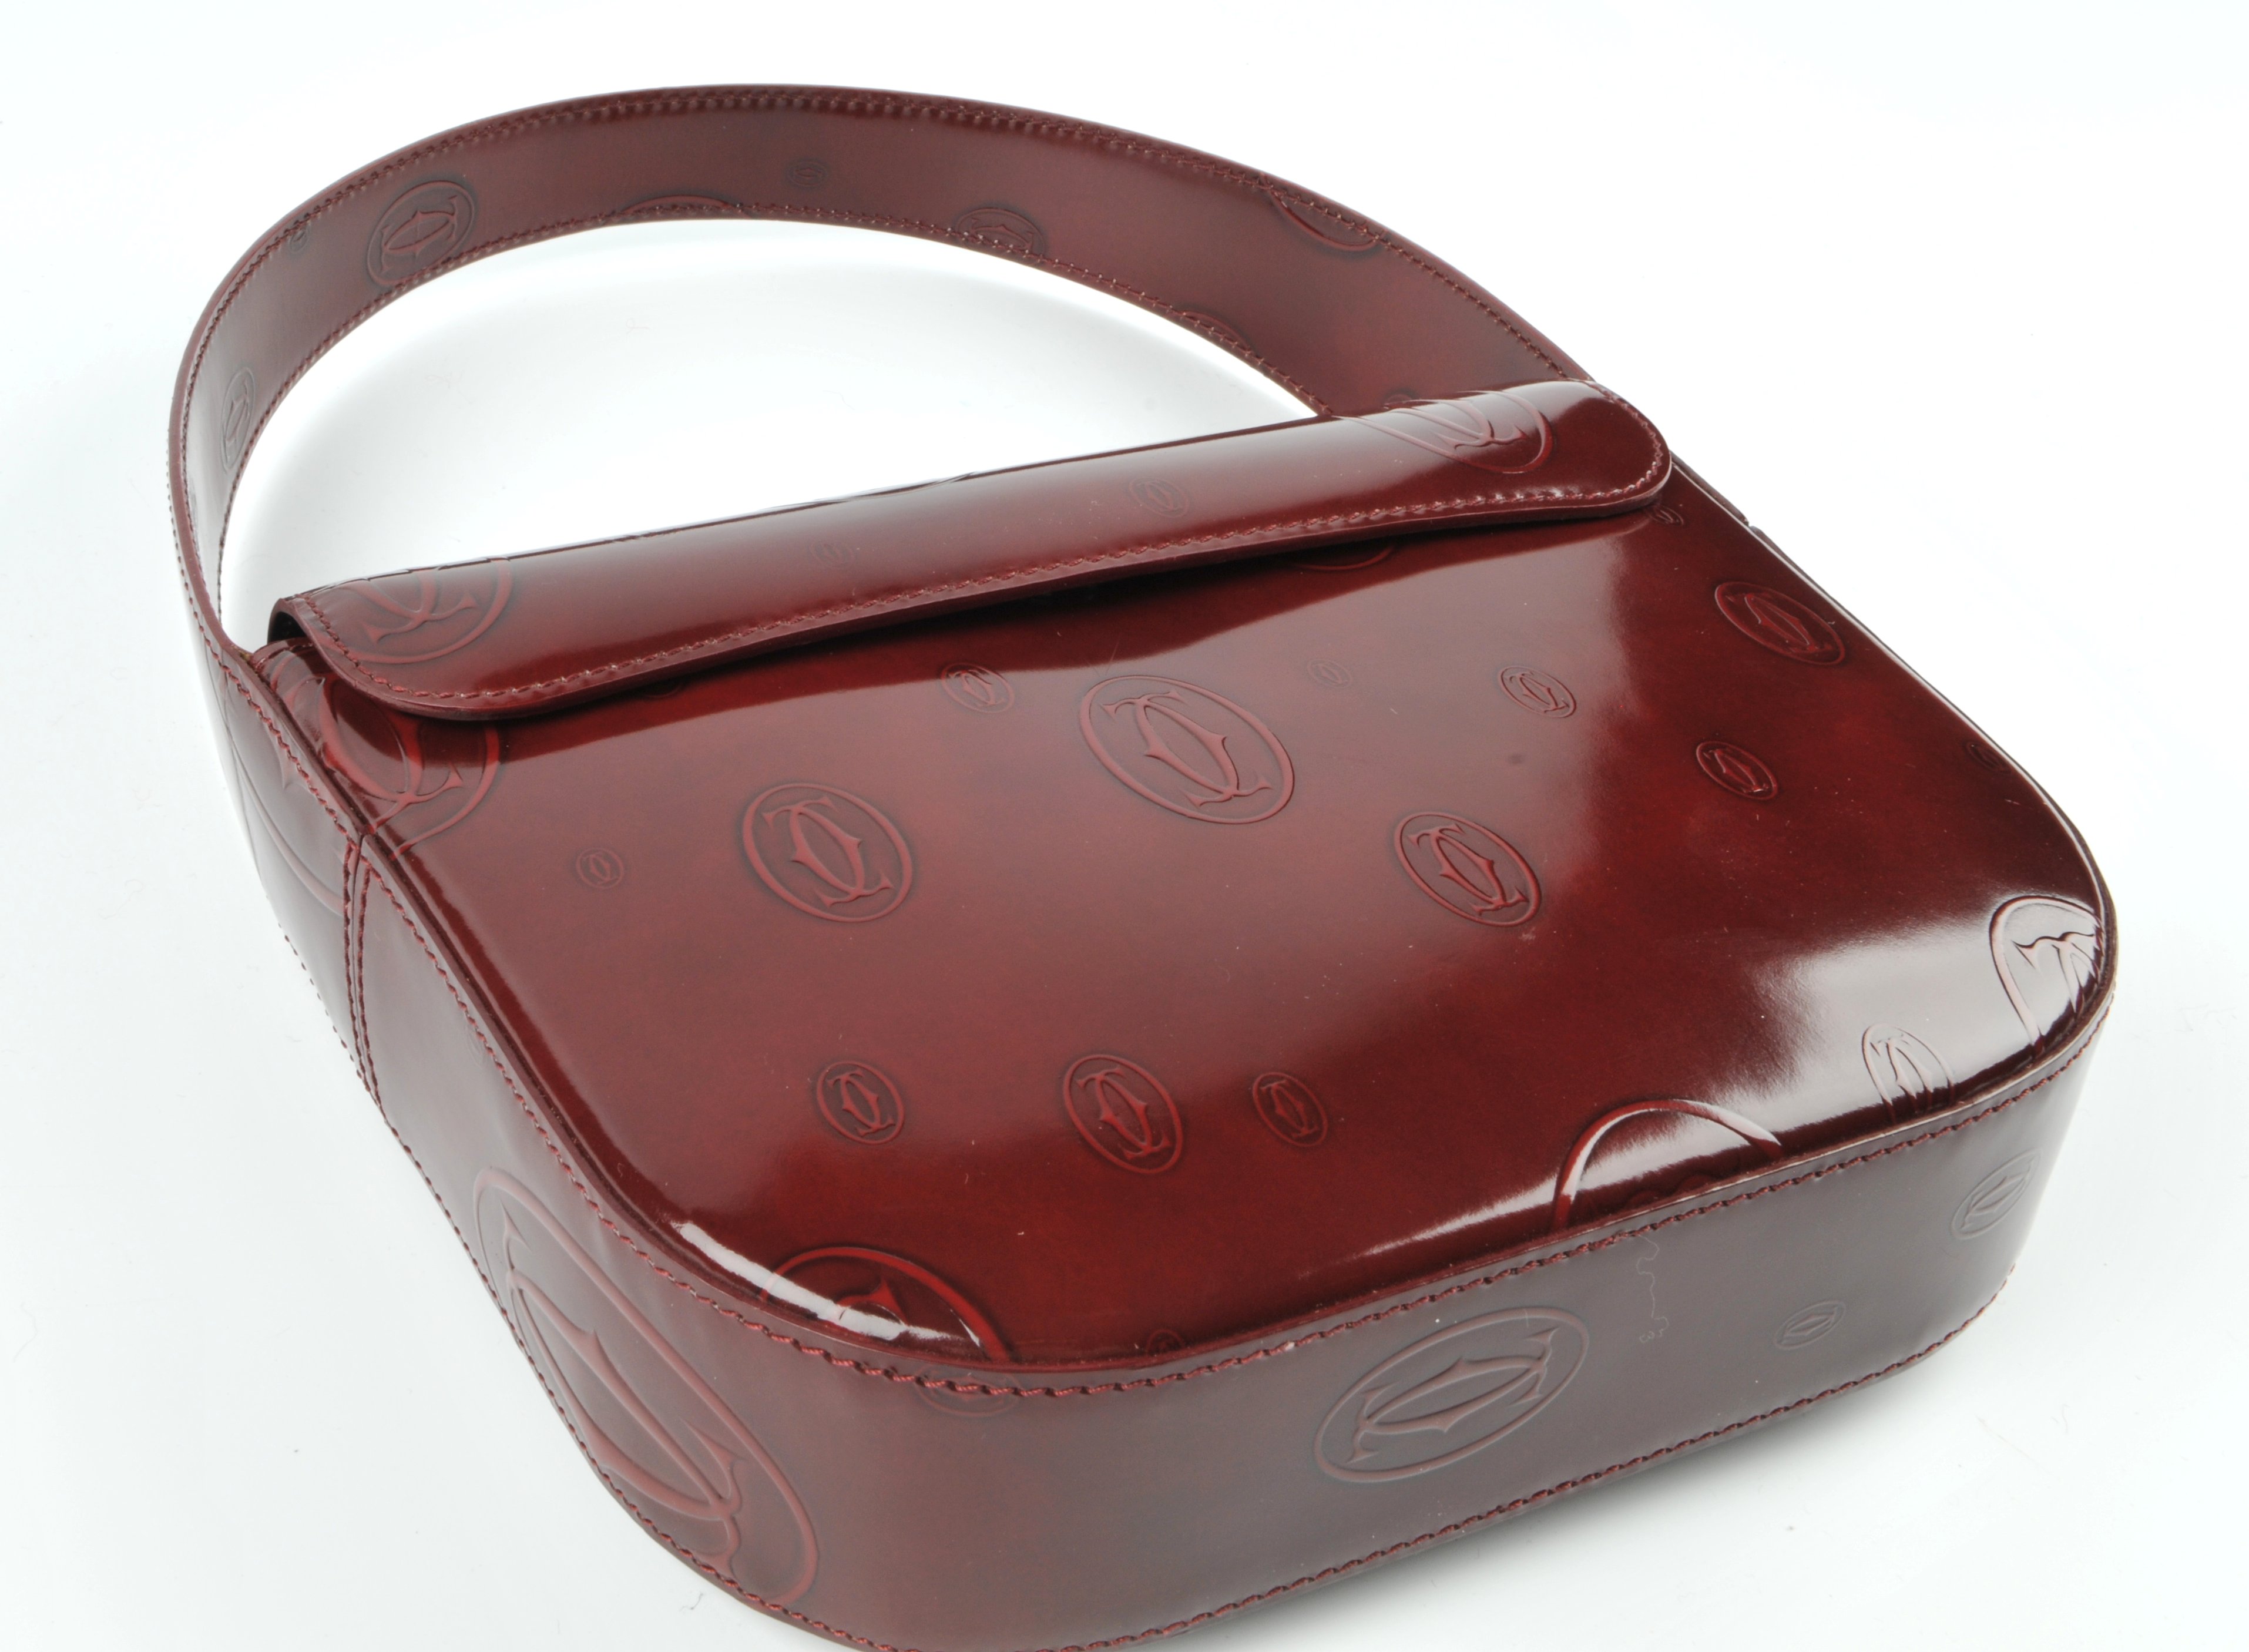 CARTIER - a Happy Birthday Bordeaux handbag. Designed with a structured shape, burgundy monogram - Image 4 of 5